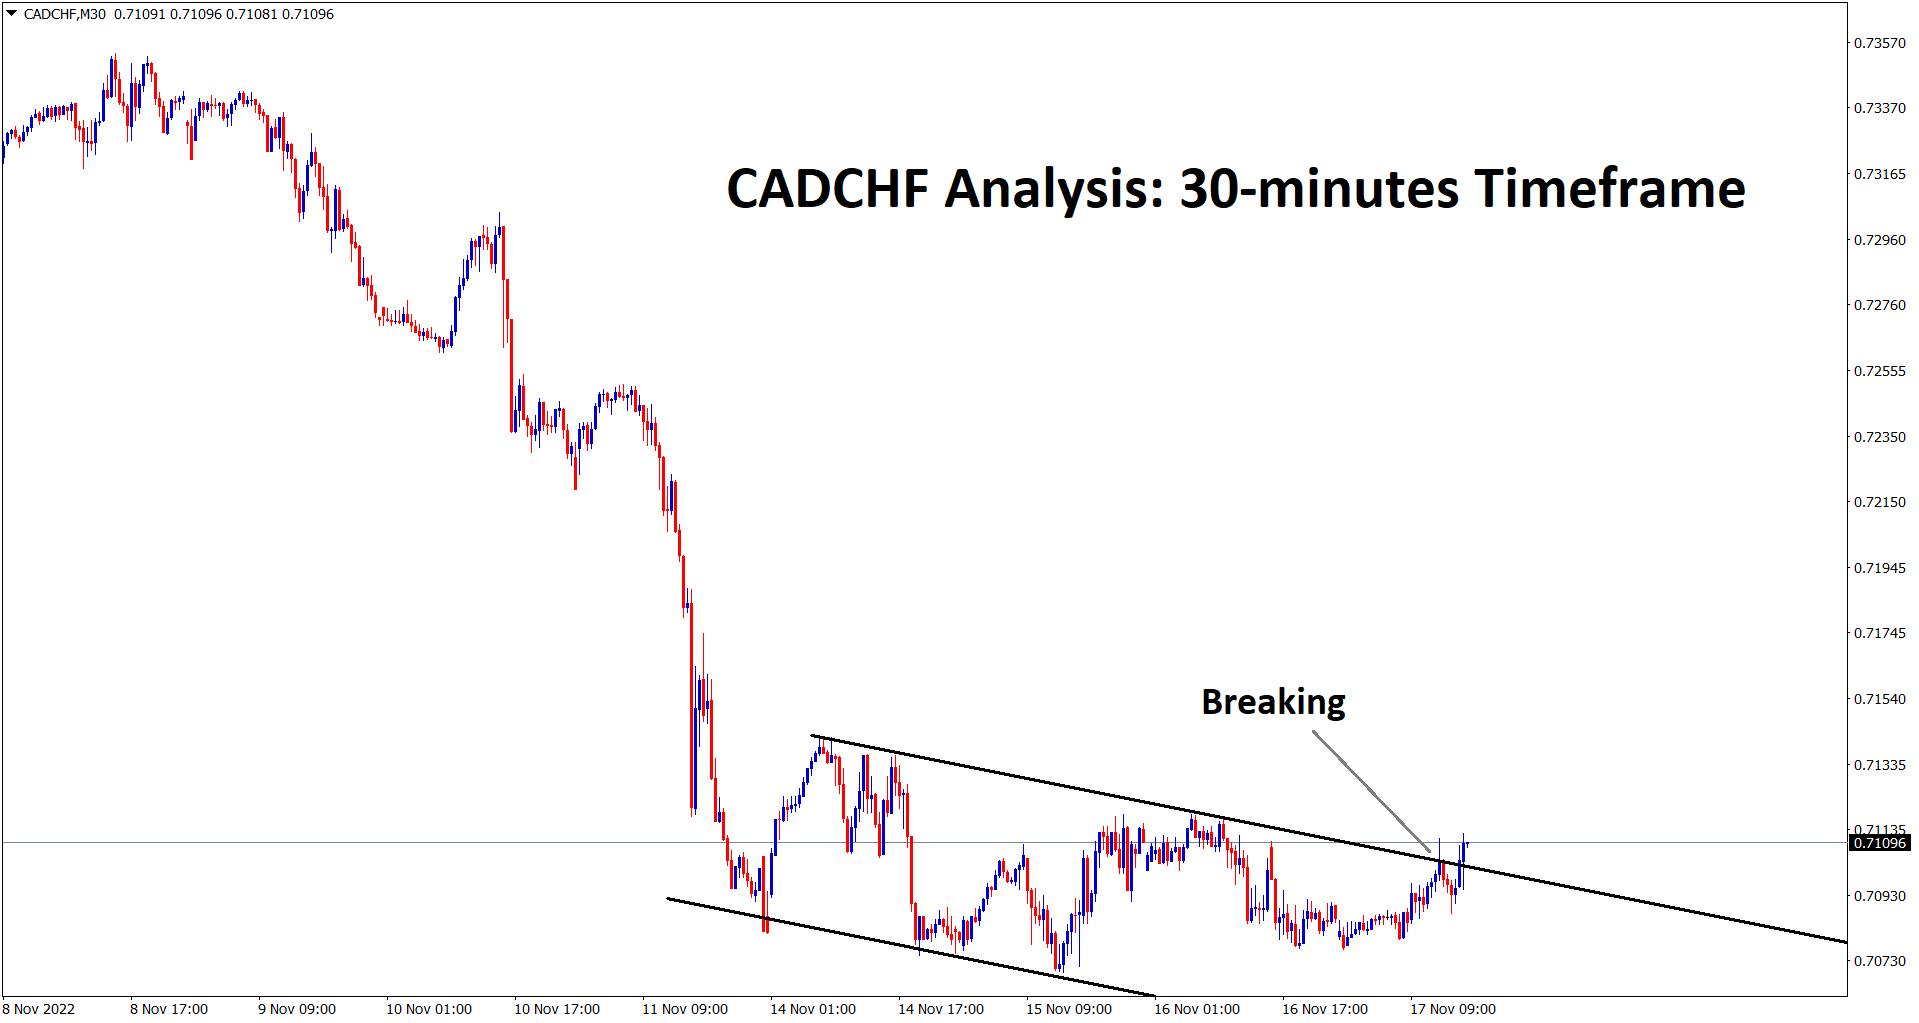 CADCHF is trying to break the lower high area of the minor channel